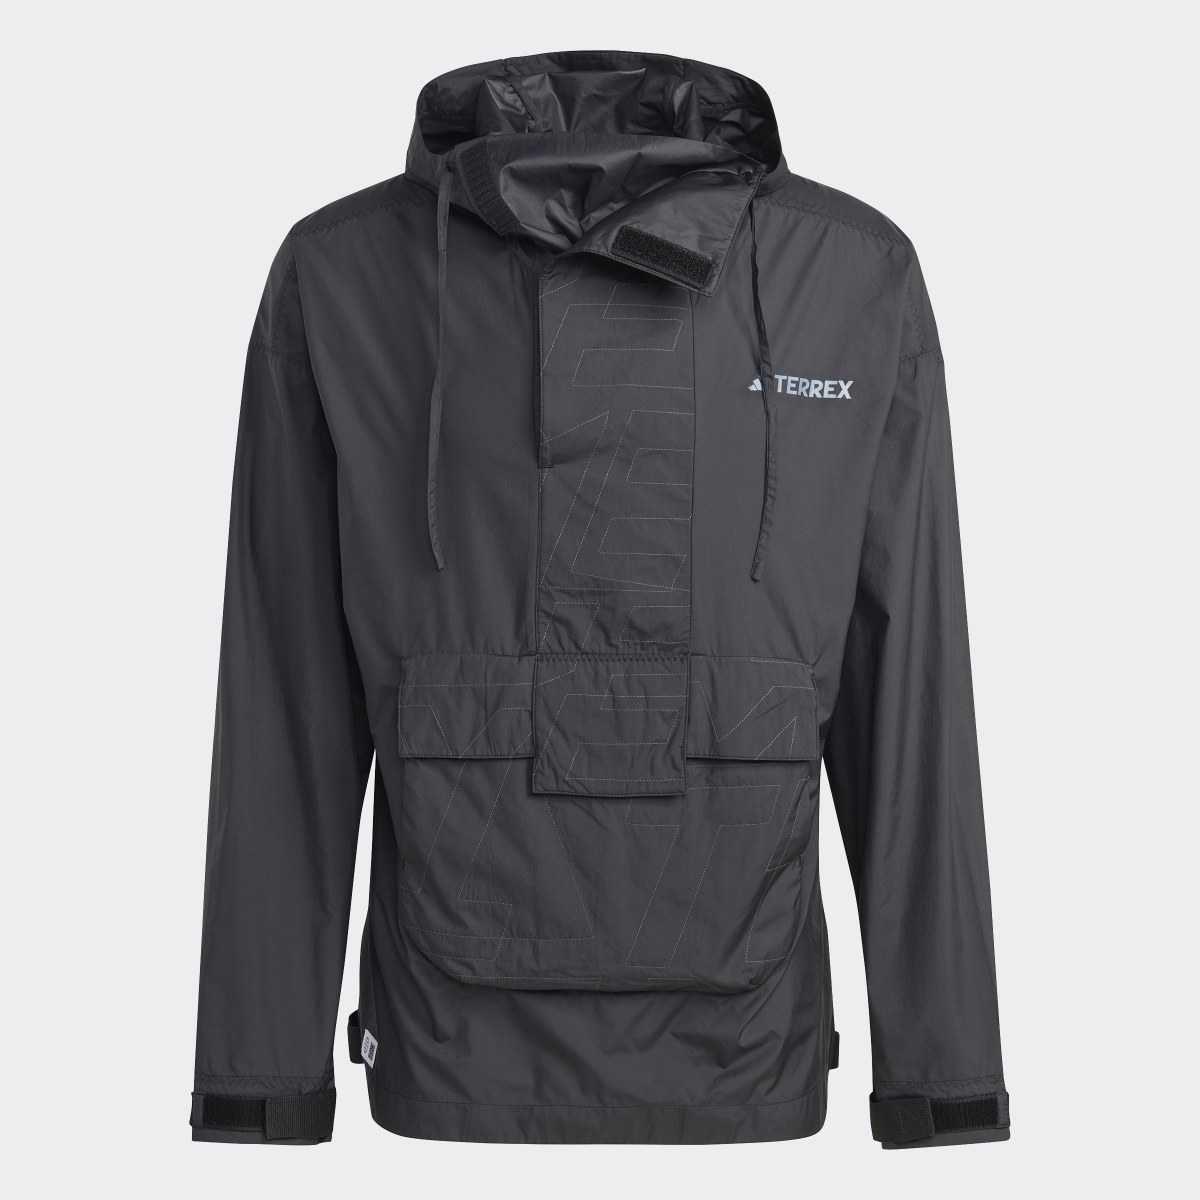 Adidas TERREX Made to Be Remade Wind Anorak. 9